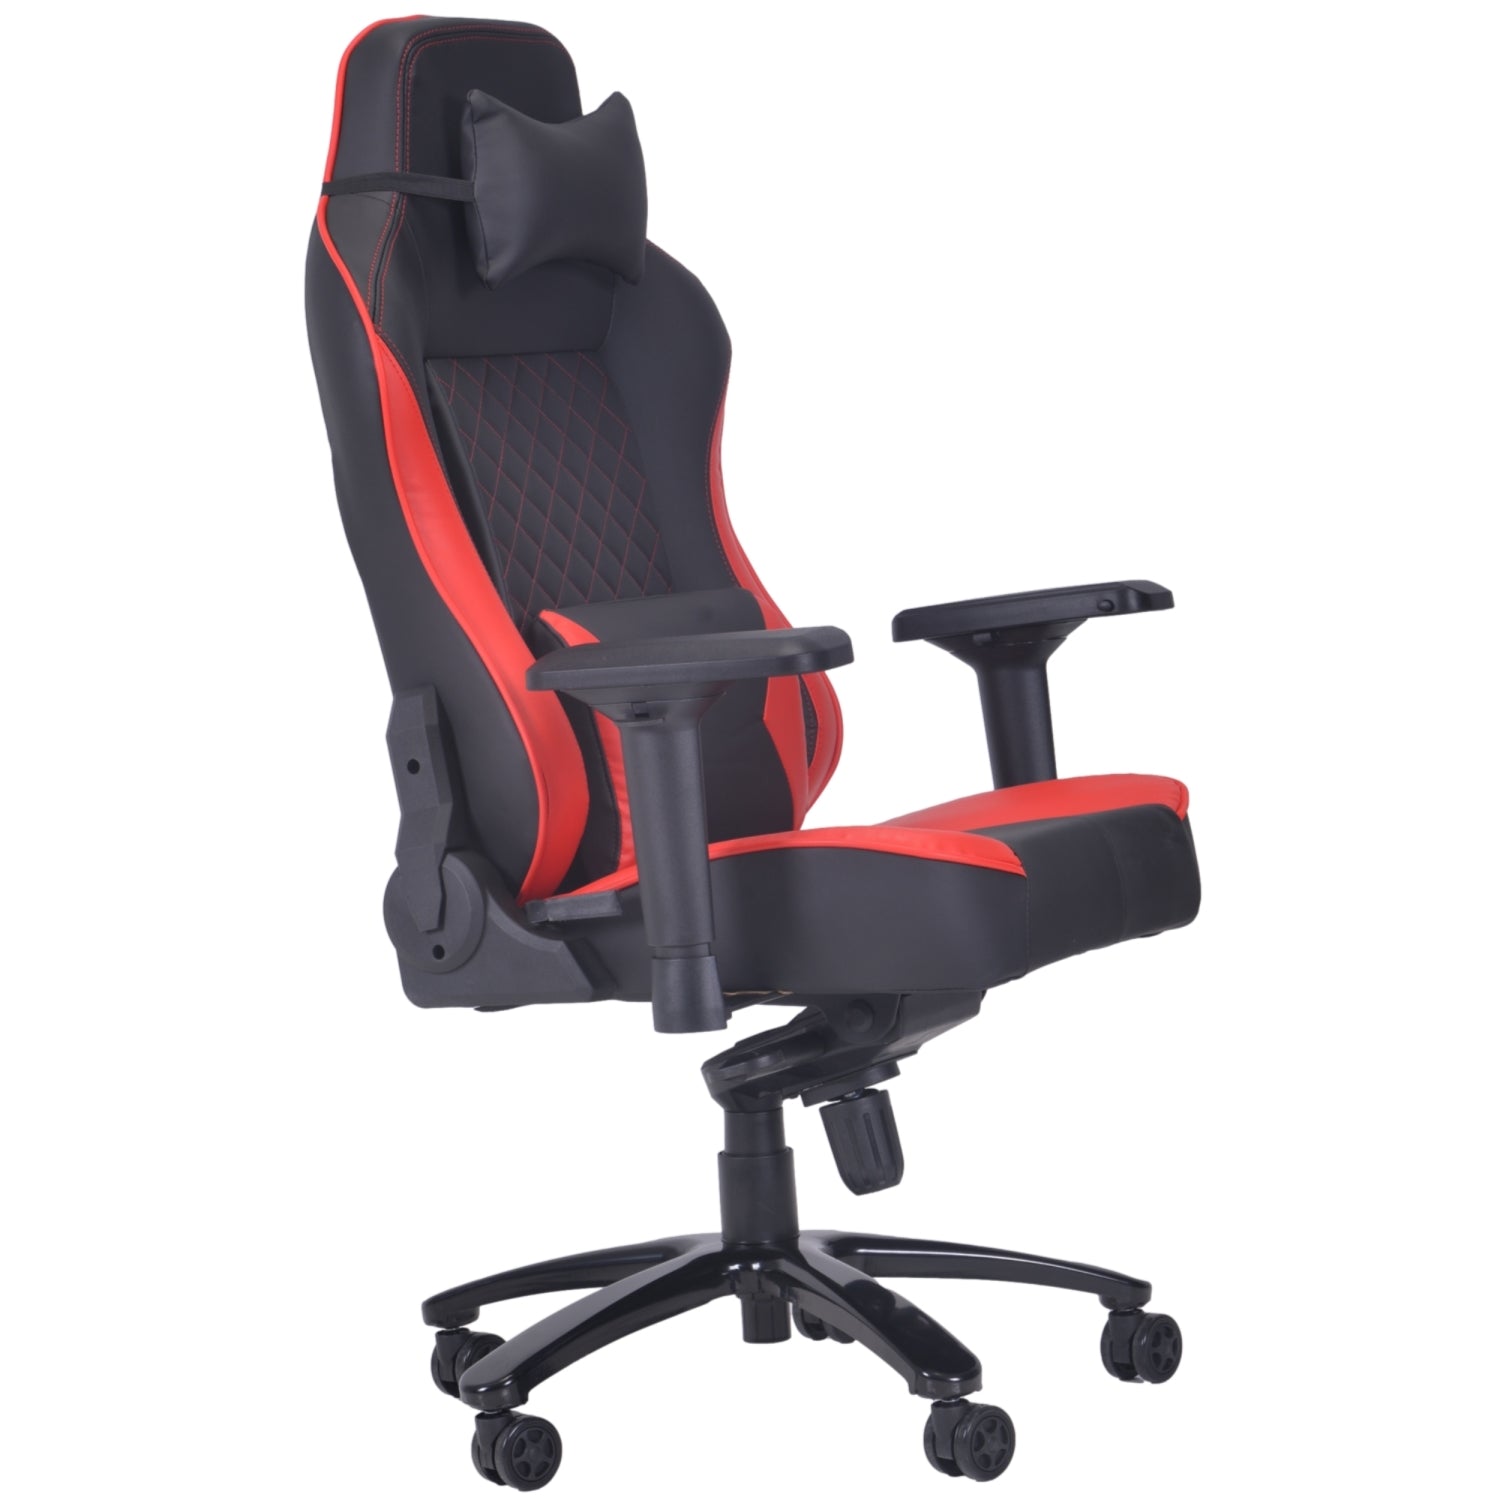 ViscoLogic MAZON ULTRA Series Racing Sports Style Sturdy Swivel Reclining Adjustable Computer Gaming Chair (Black & Red)